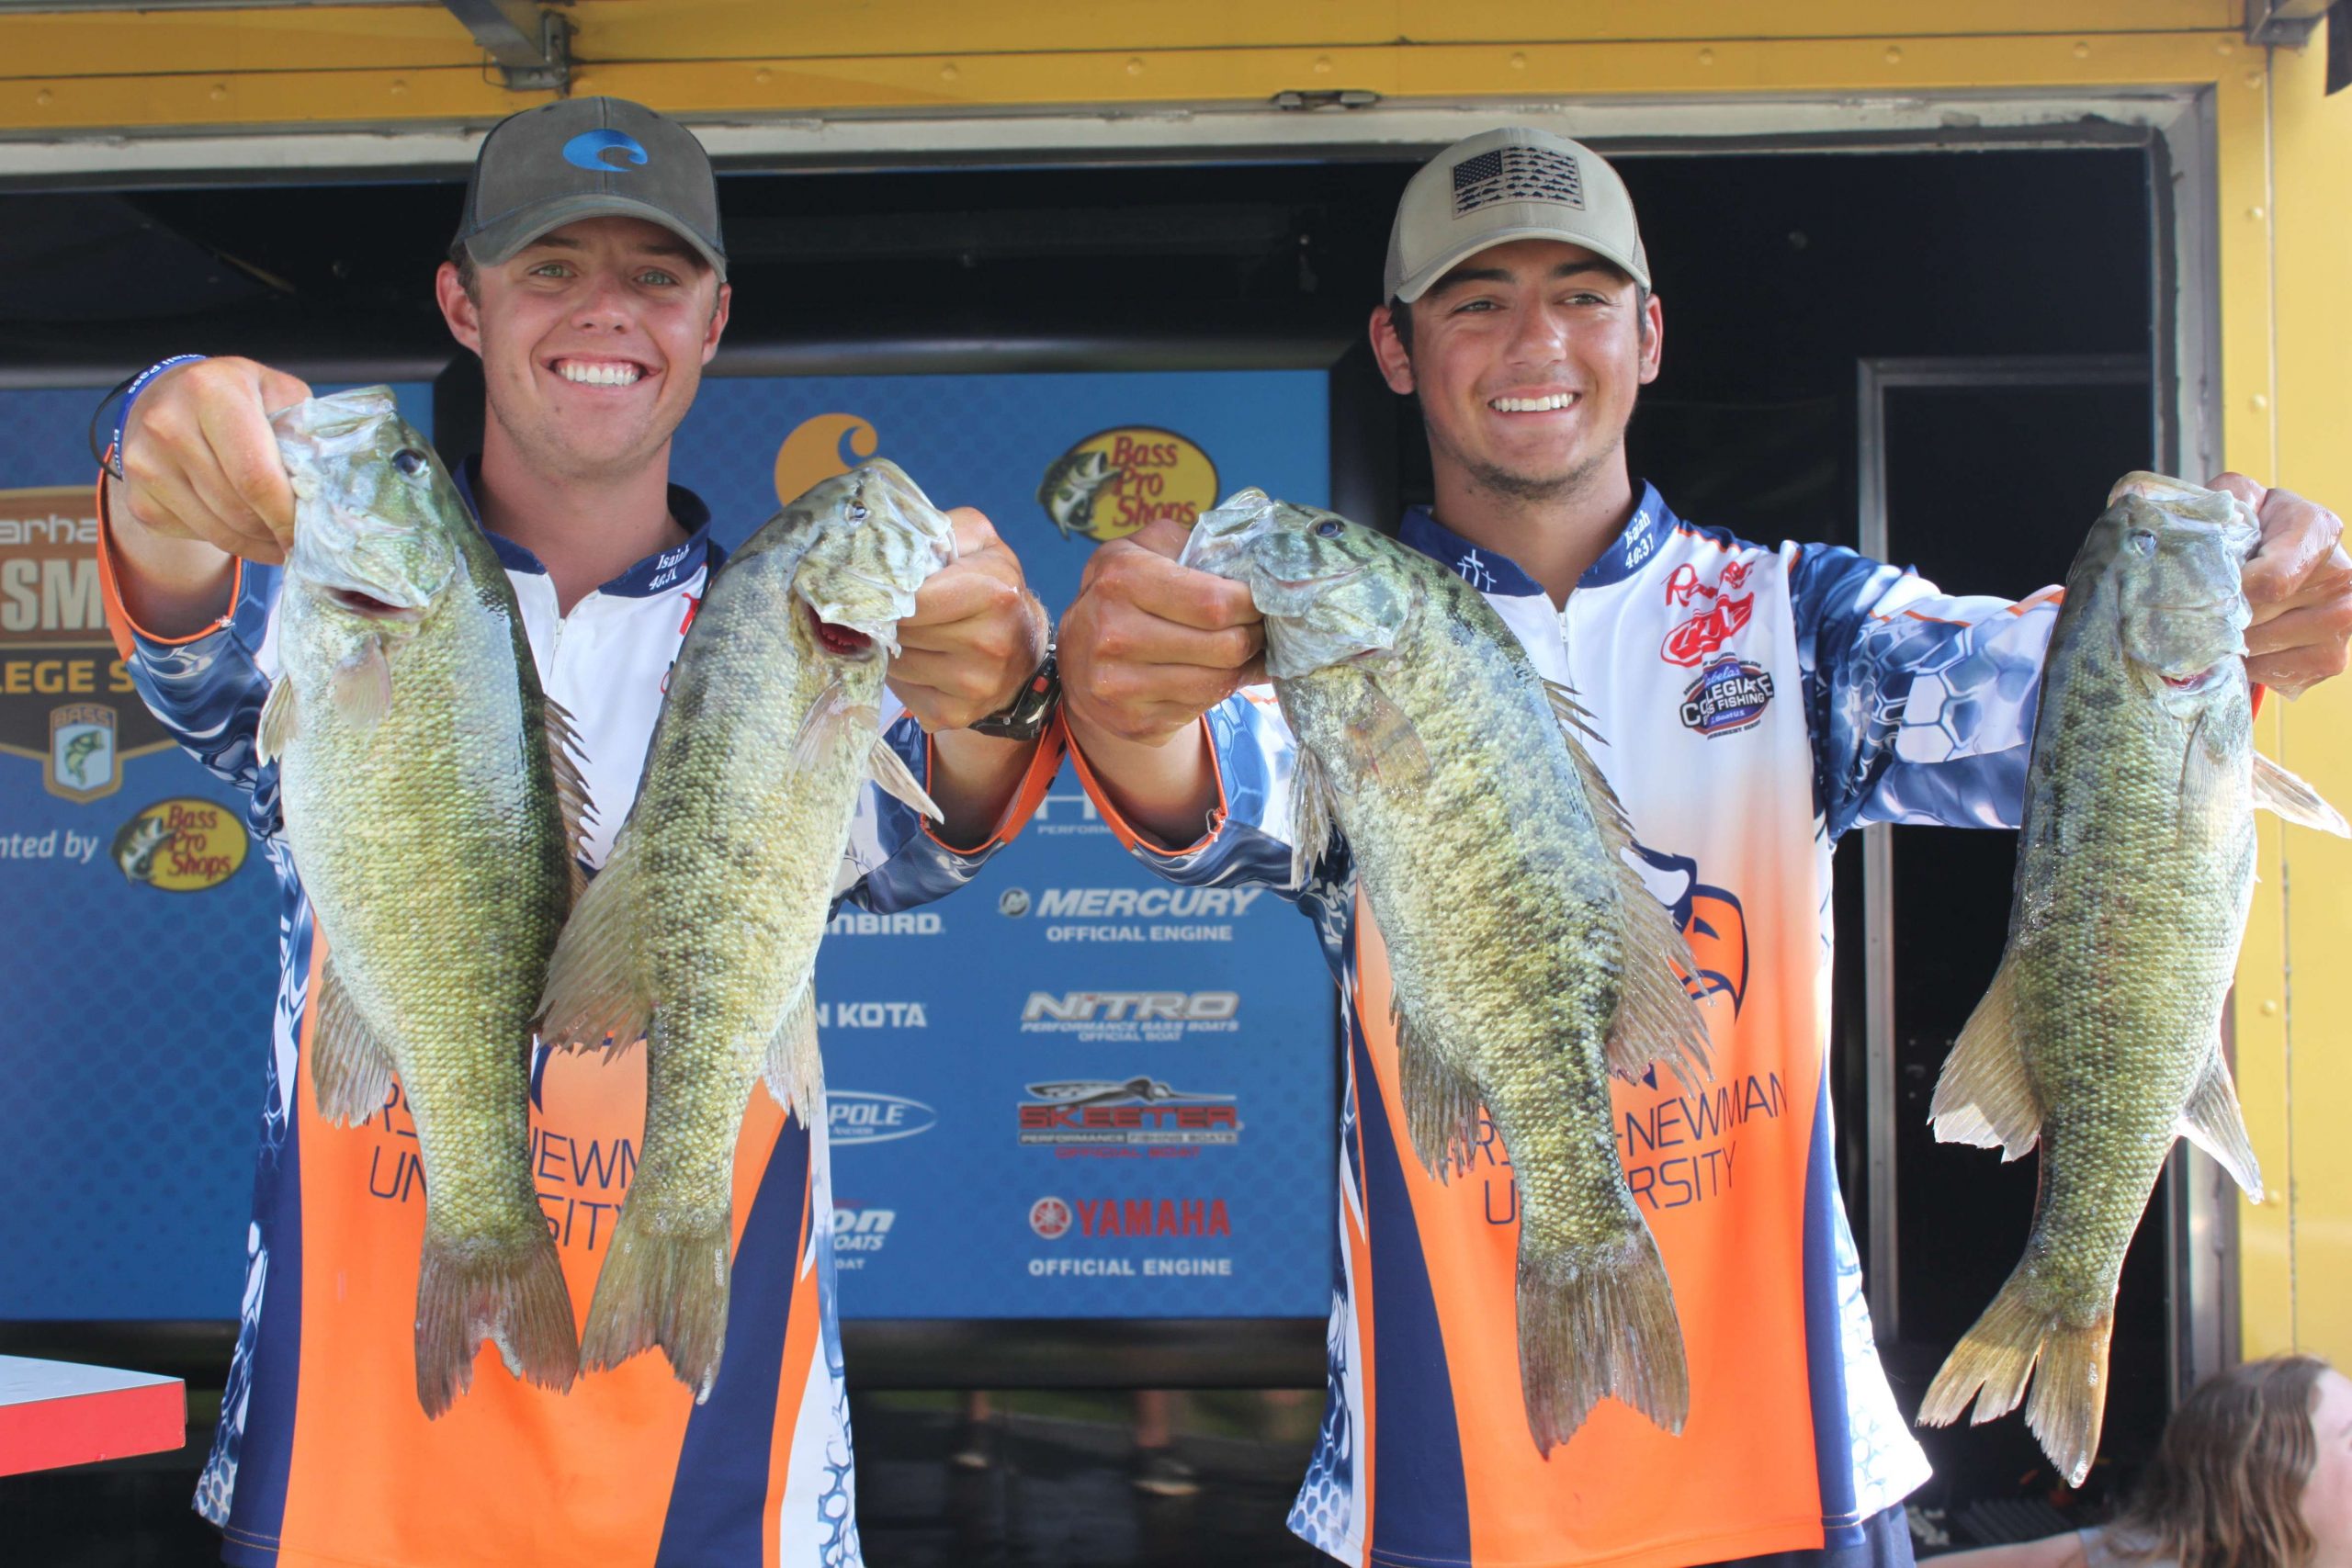 Hunter Sales and Tristan Stalsworth of Carson-Newman University, which is located in the host town of Jefferson City, Tenn., are in 11th place with 26-1.